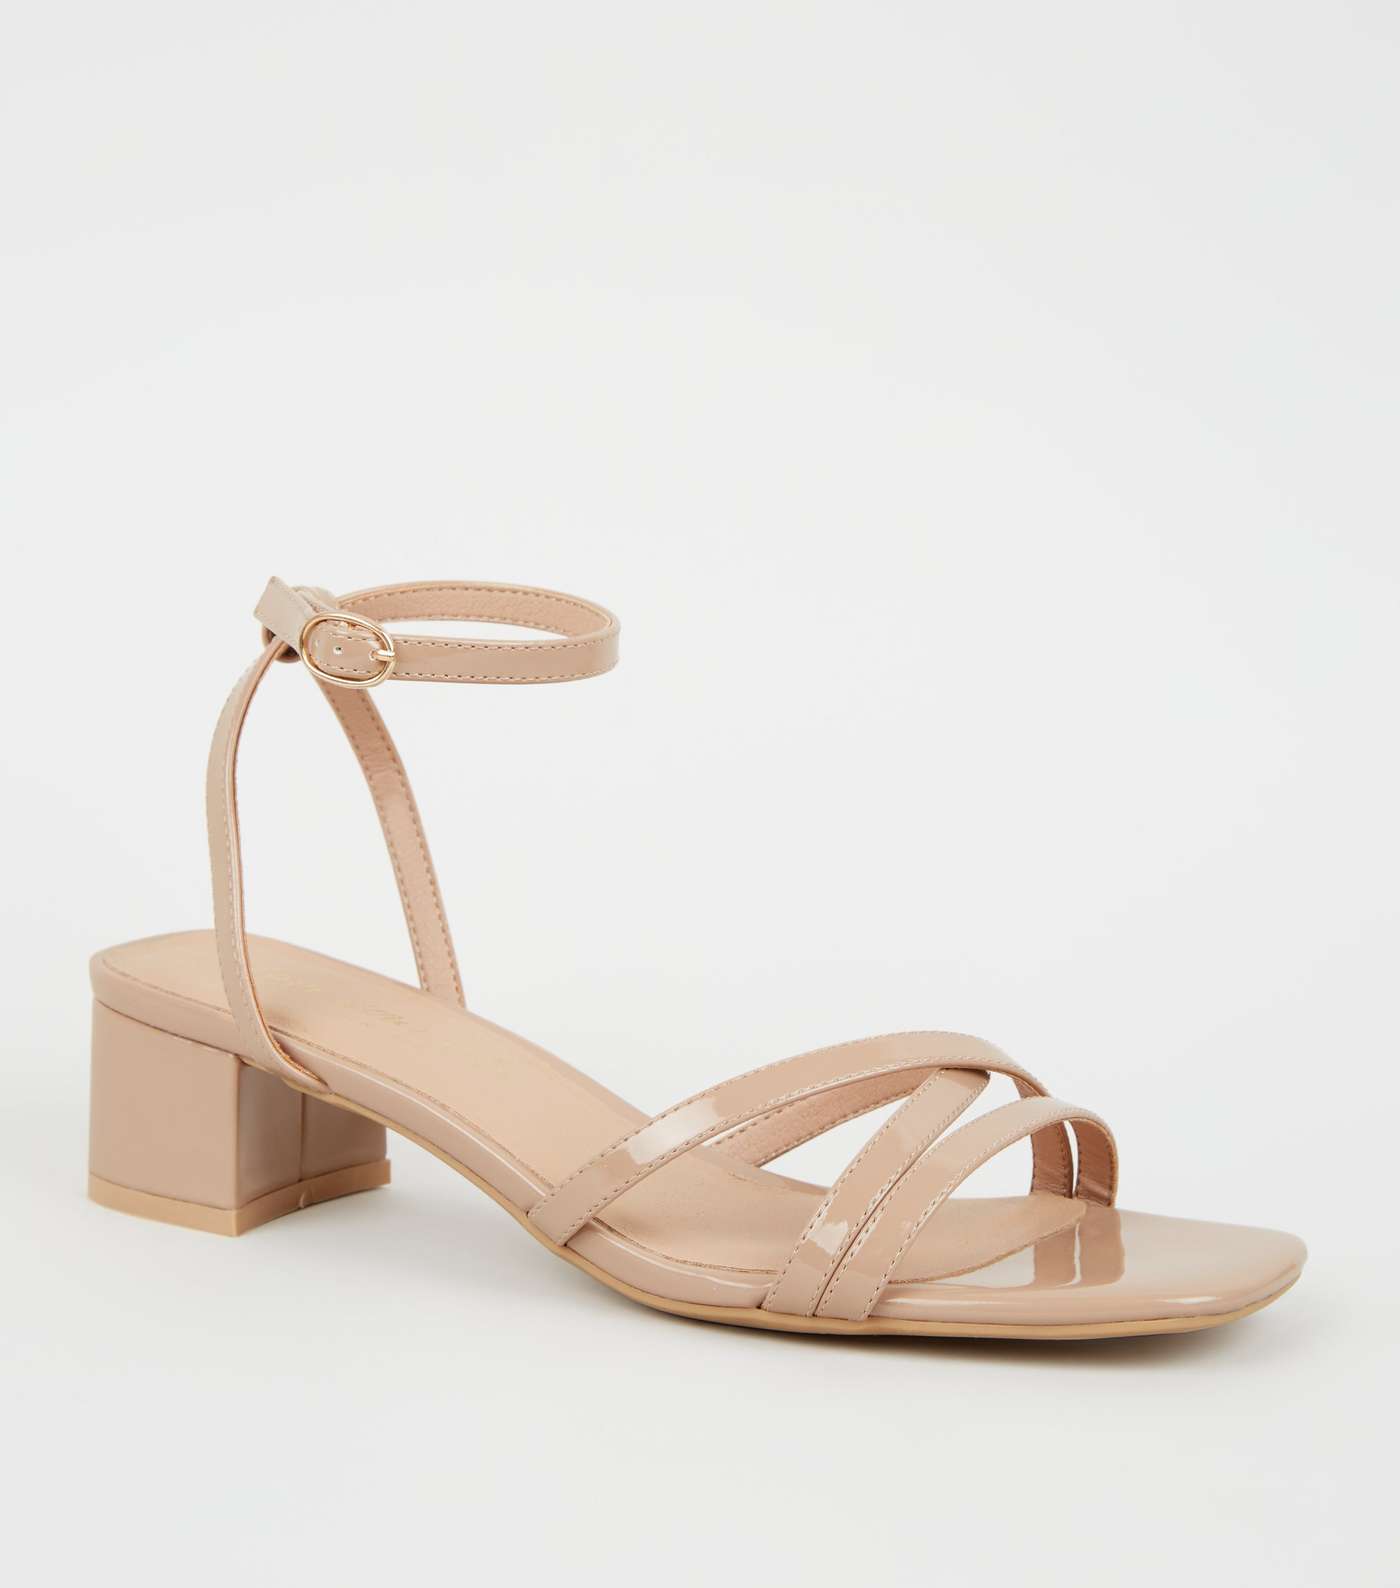 Camel Patent Strappy Low Heel Sandals